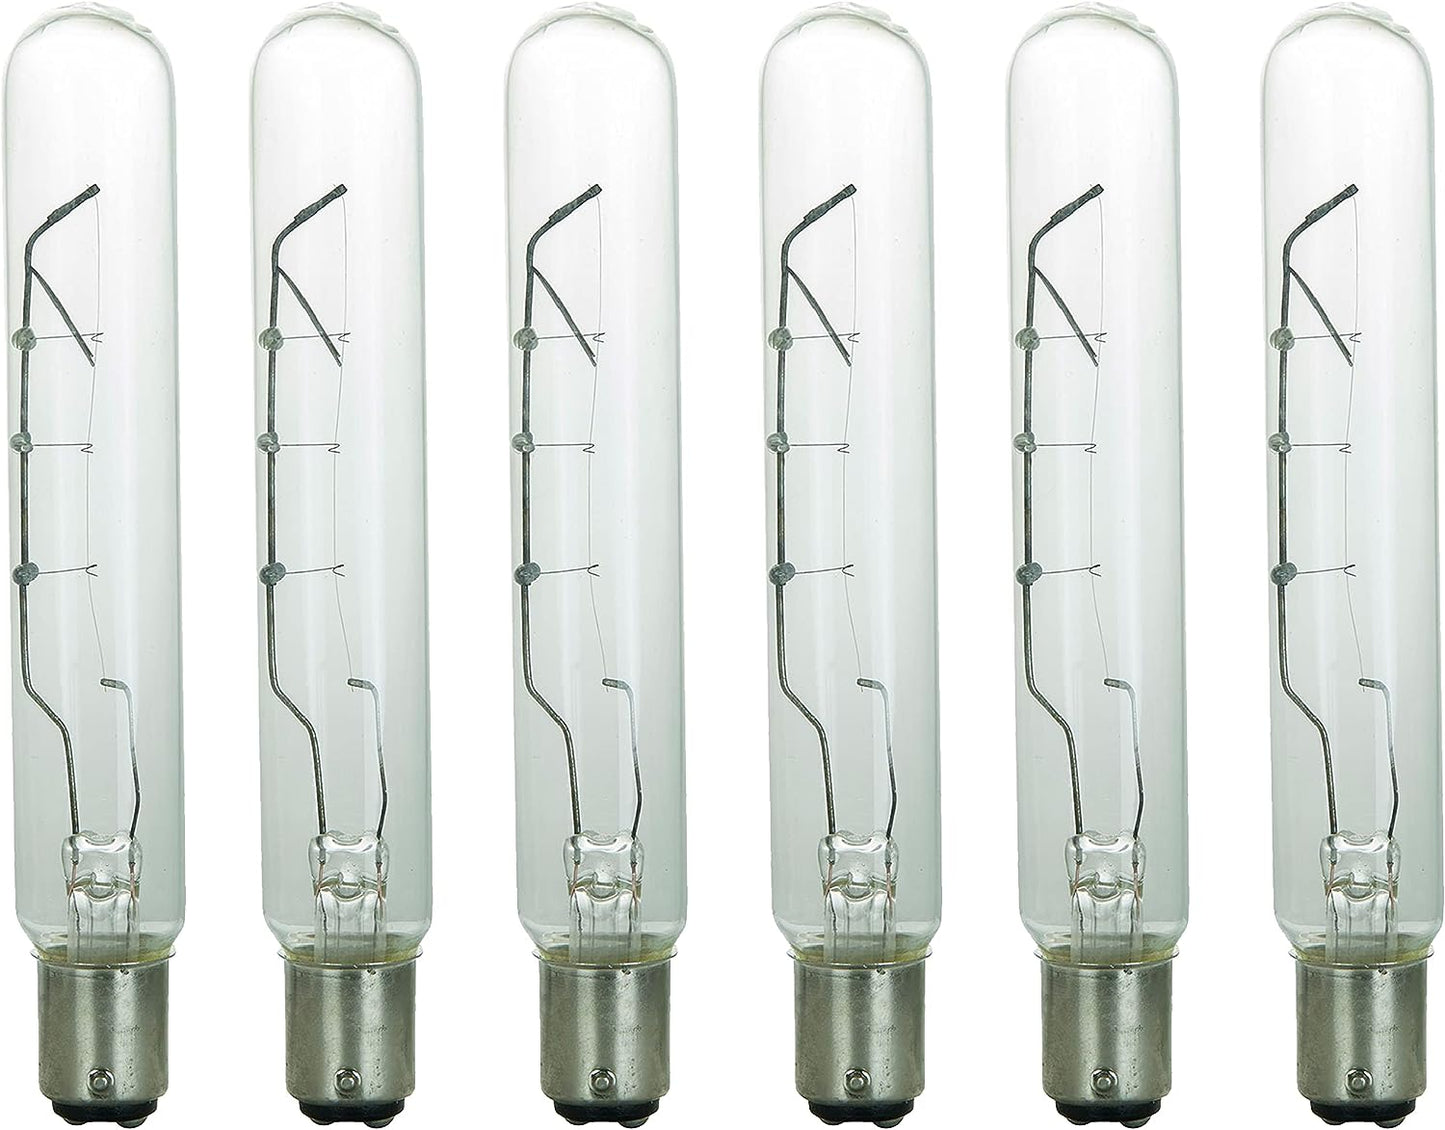 Sunlite Incandescent T6.5 Tubular Light Bulb, BA15D Double Contact Bayonet Base 25 Watts, 170 Lumens, Dimmable, Mercury Free, 2600K Warm White, 6 Count, Clear